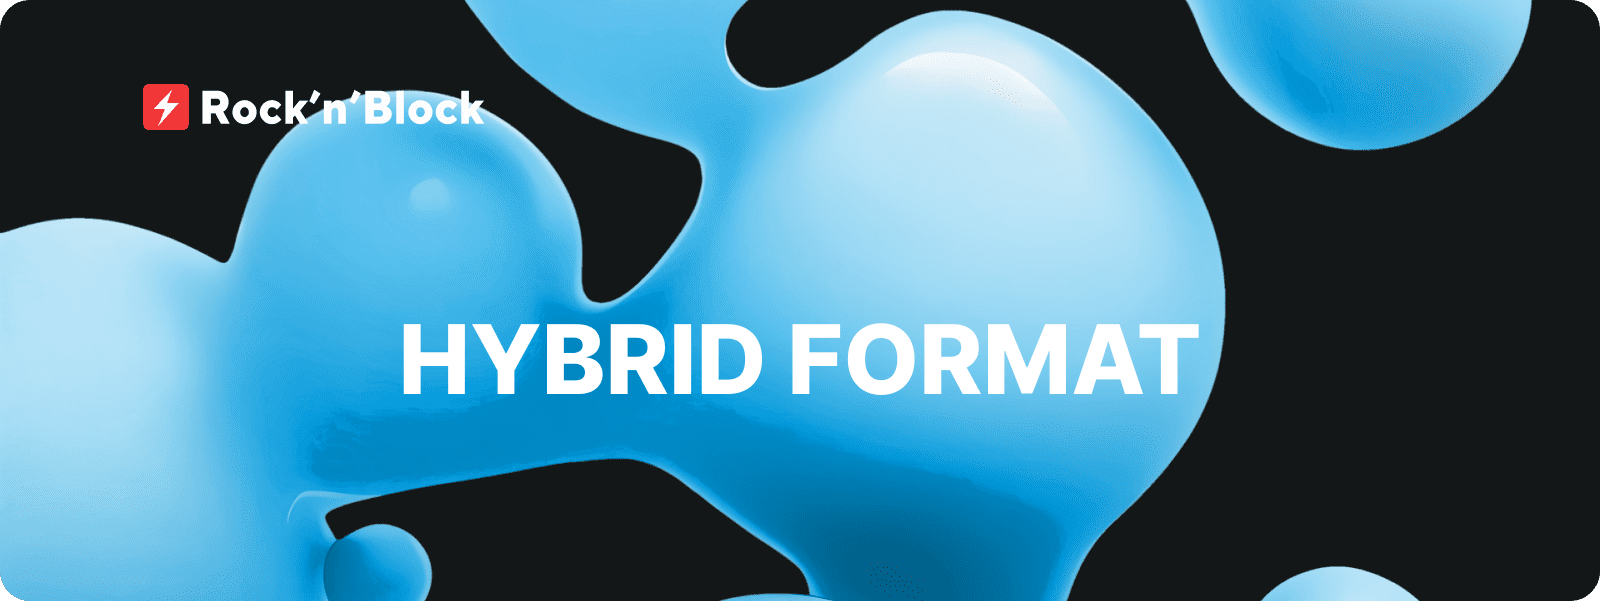 Hybrid Format: Legal Aspects in Smart Contract Development